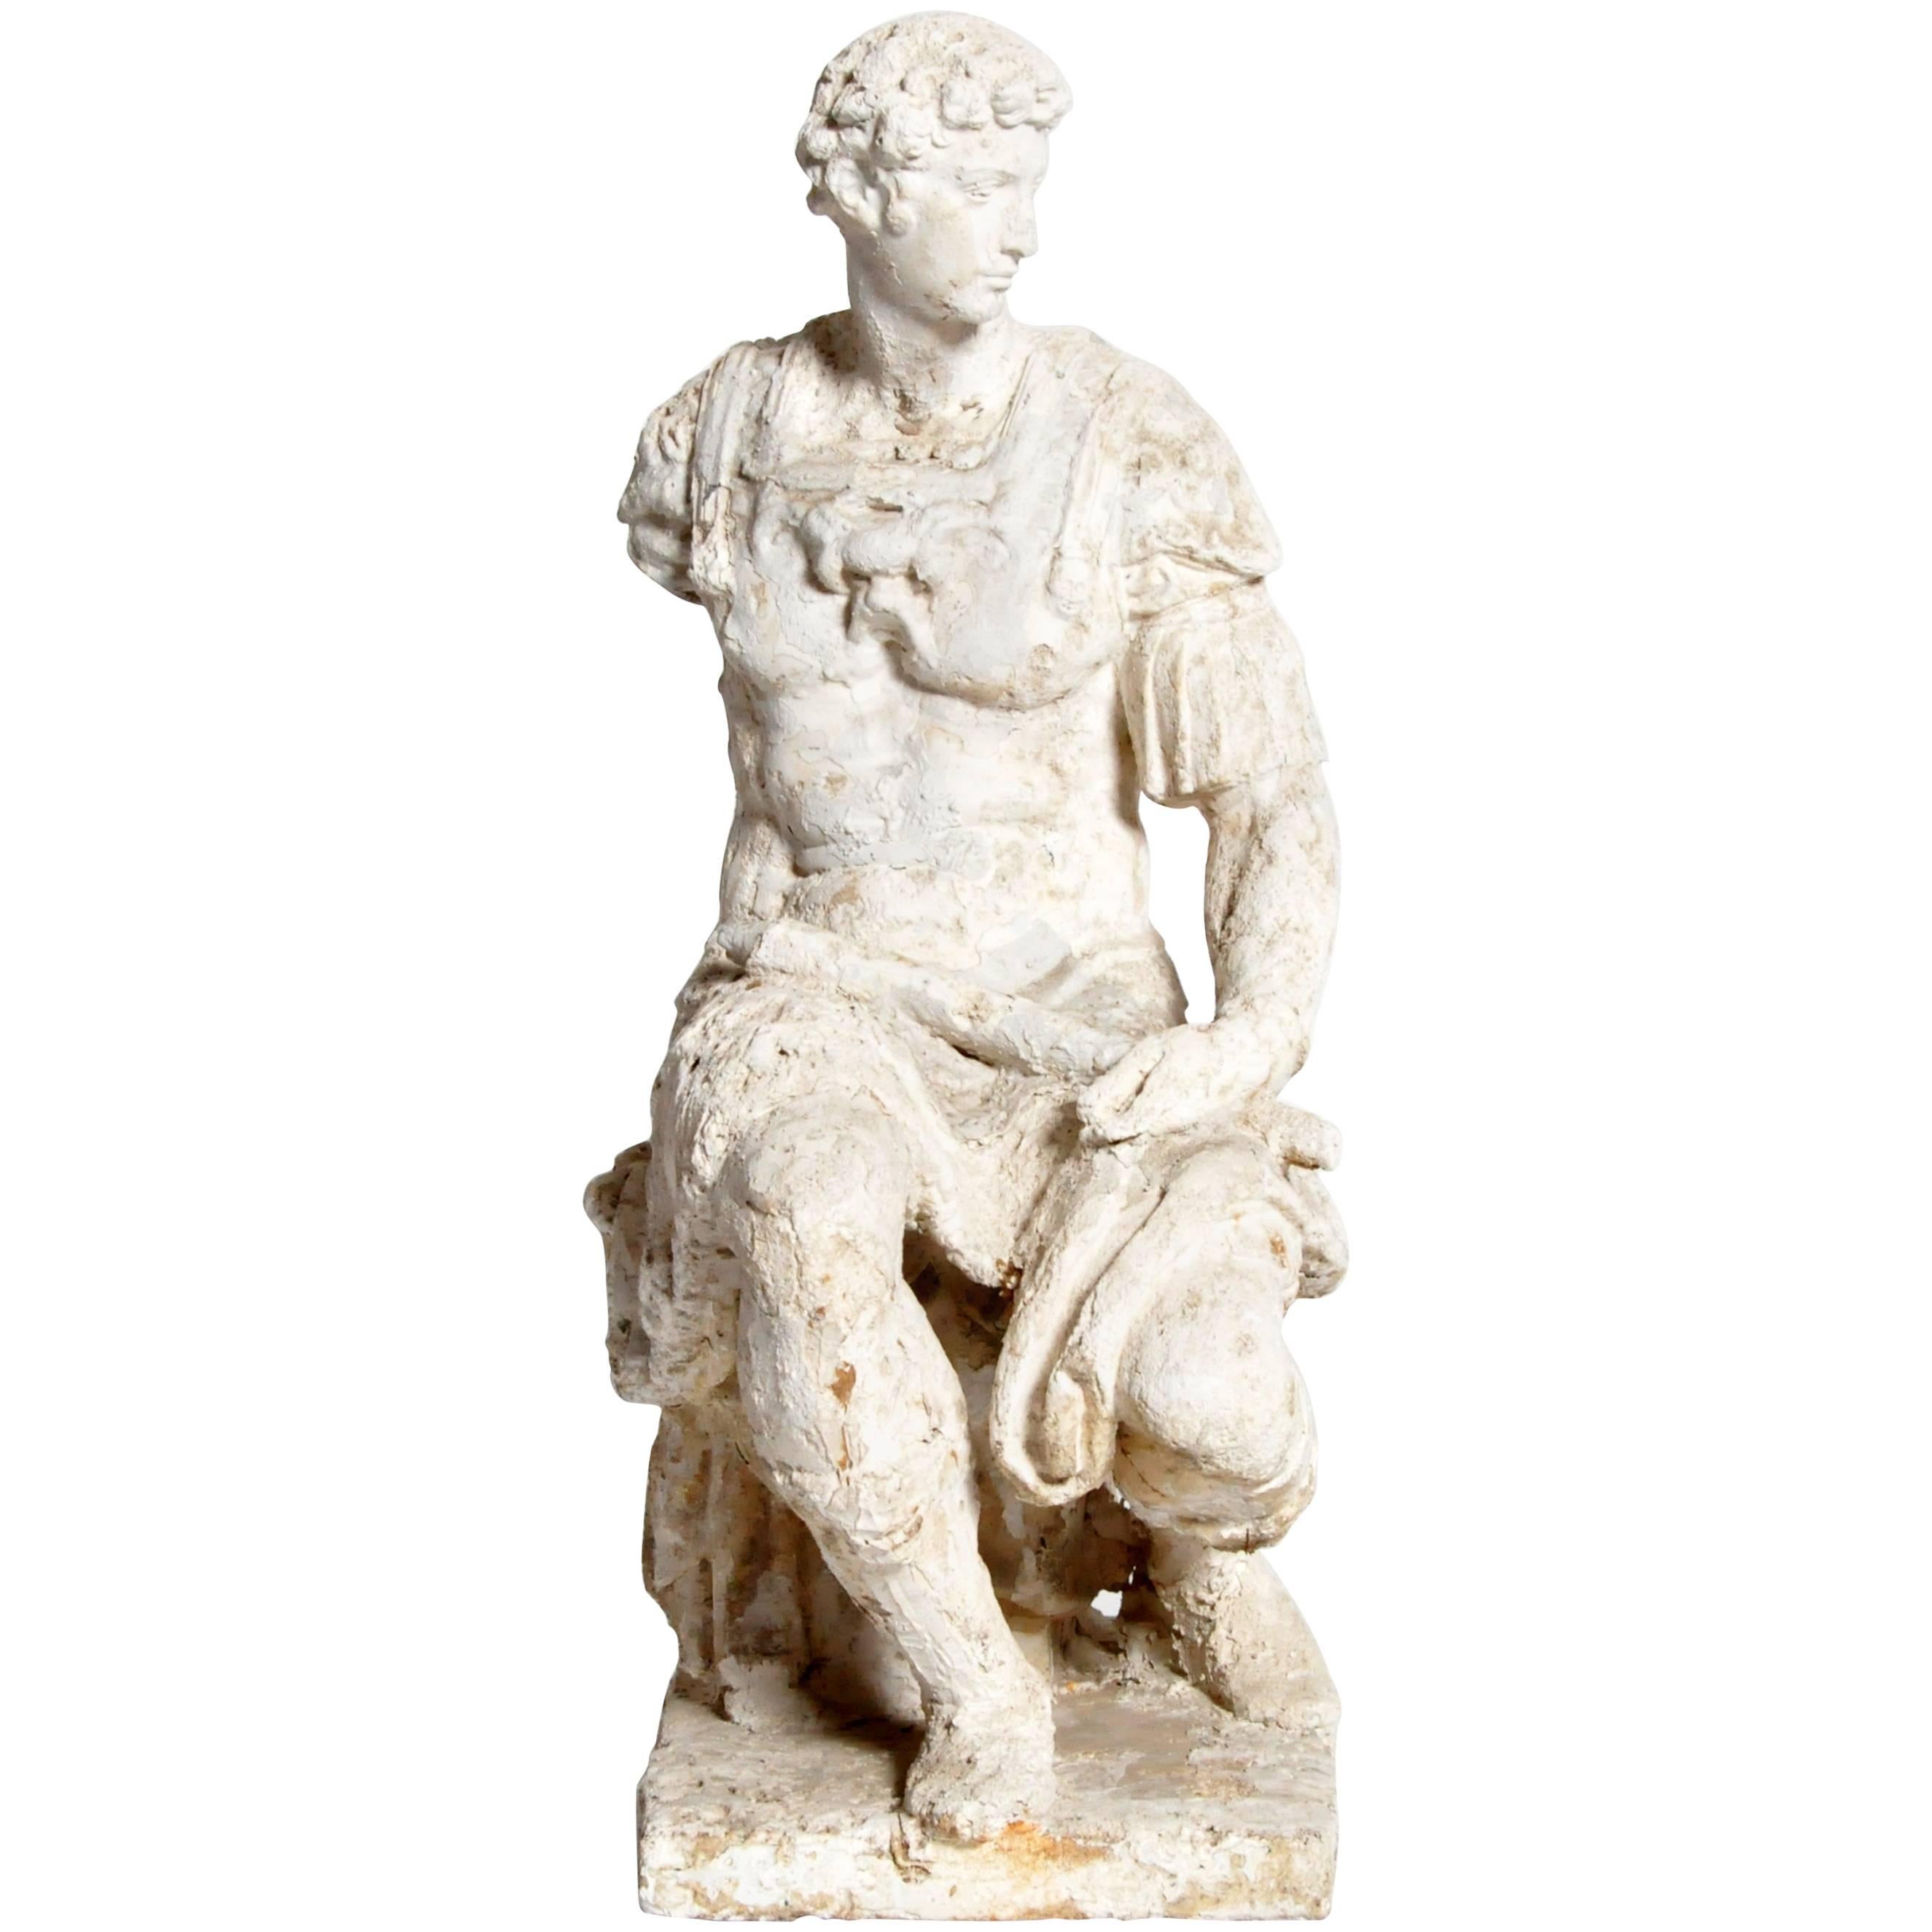 Garden Statue of a Seated Roman Soldier